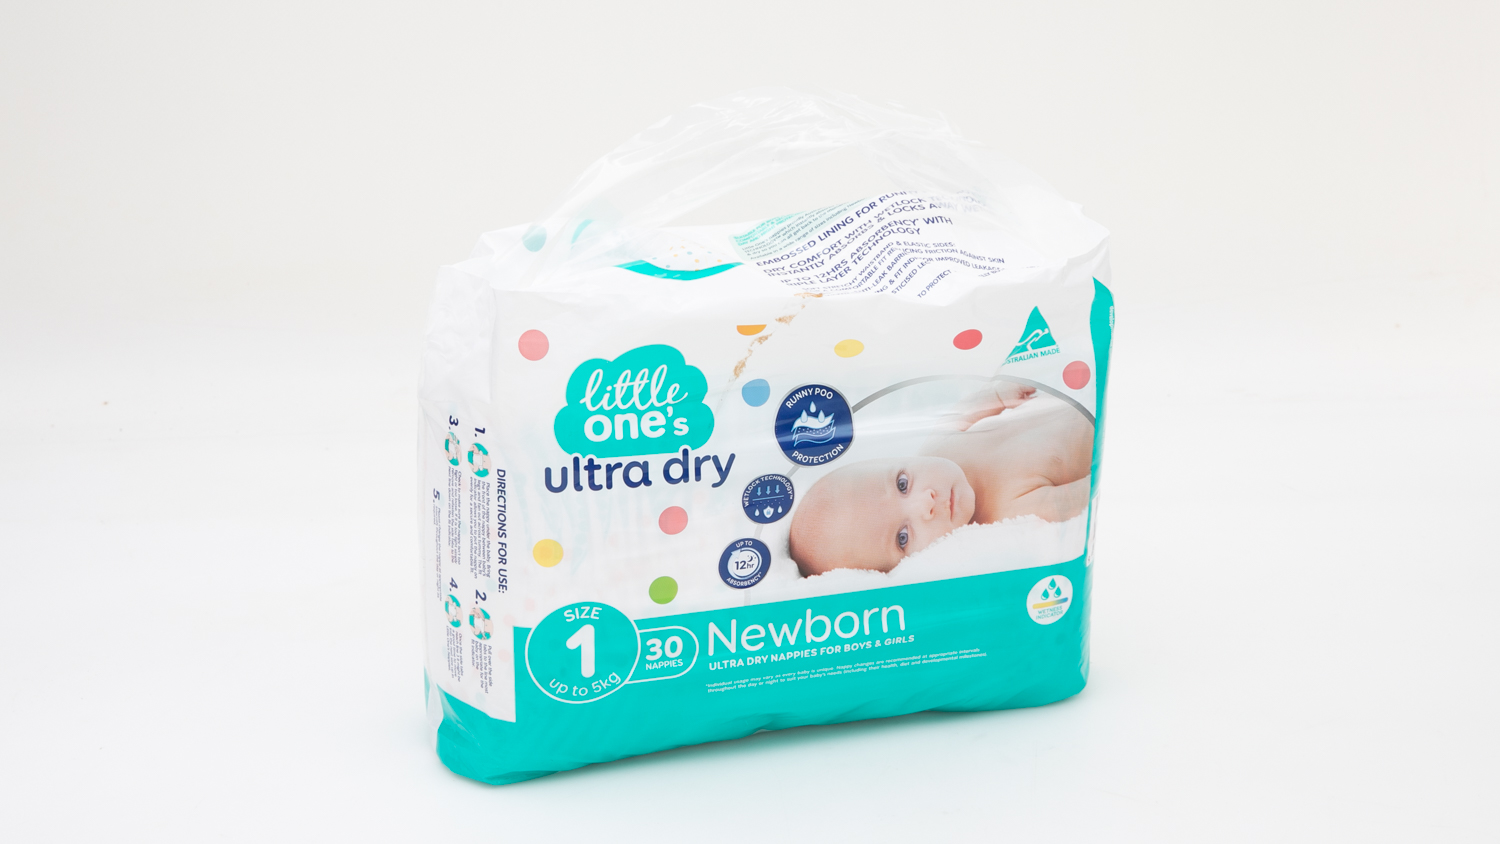 Woolworths Little One's Ultra Dry Size 1 Newborn carousel image